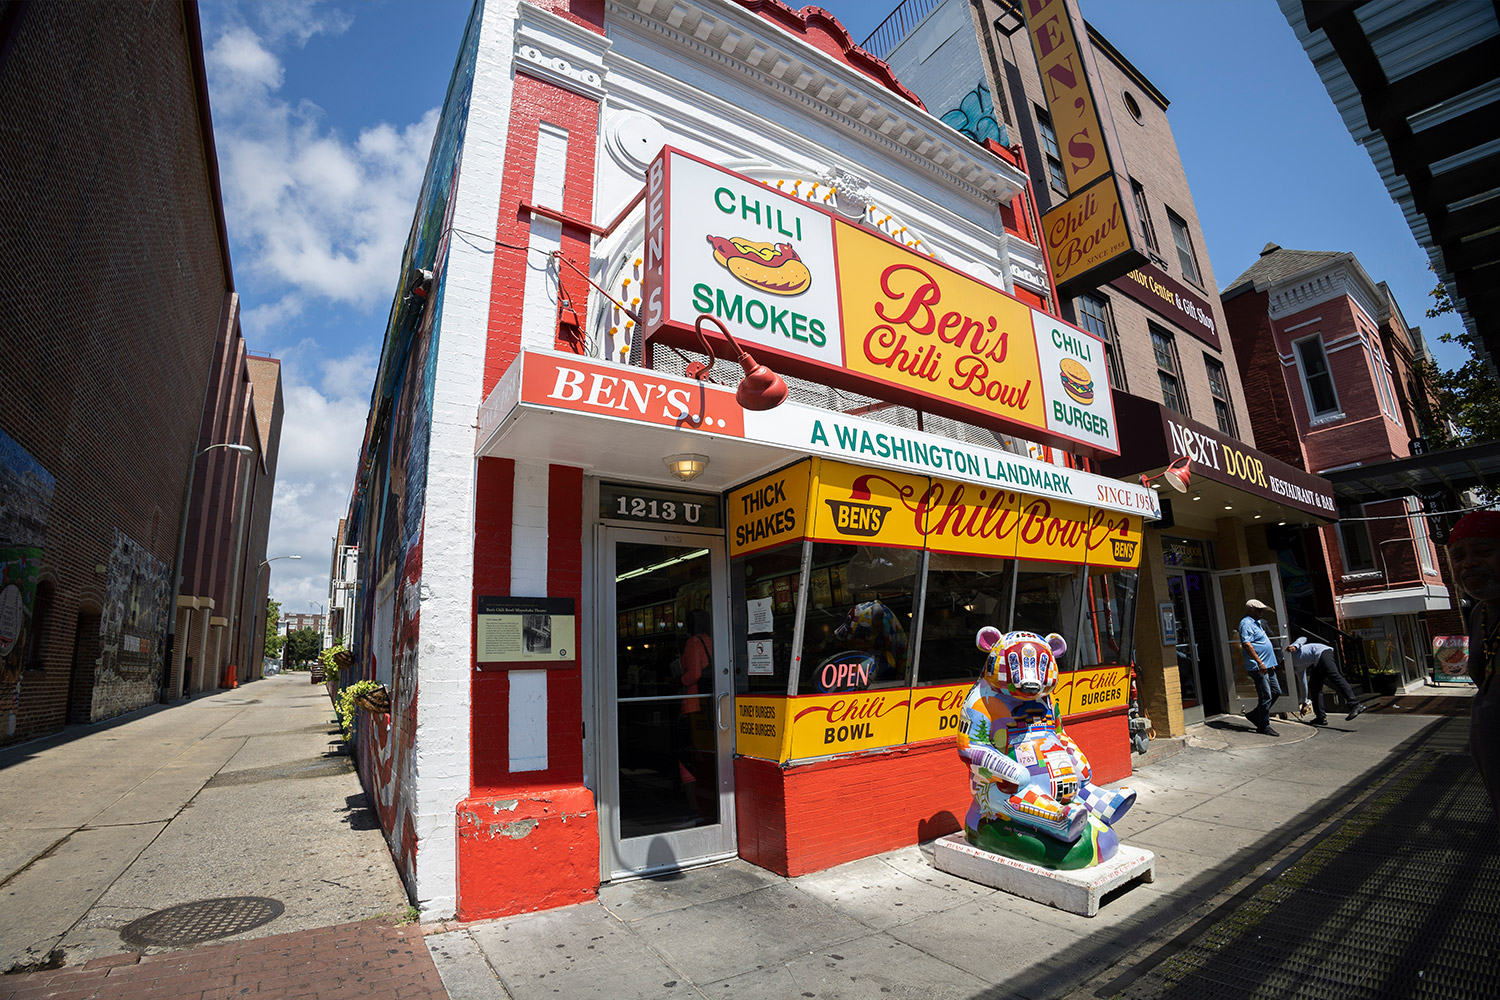 Outside of Ben's Chili Bowl brick restaurant painted bright red, yellow and white